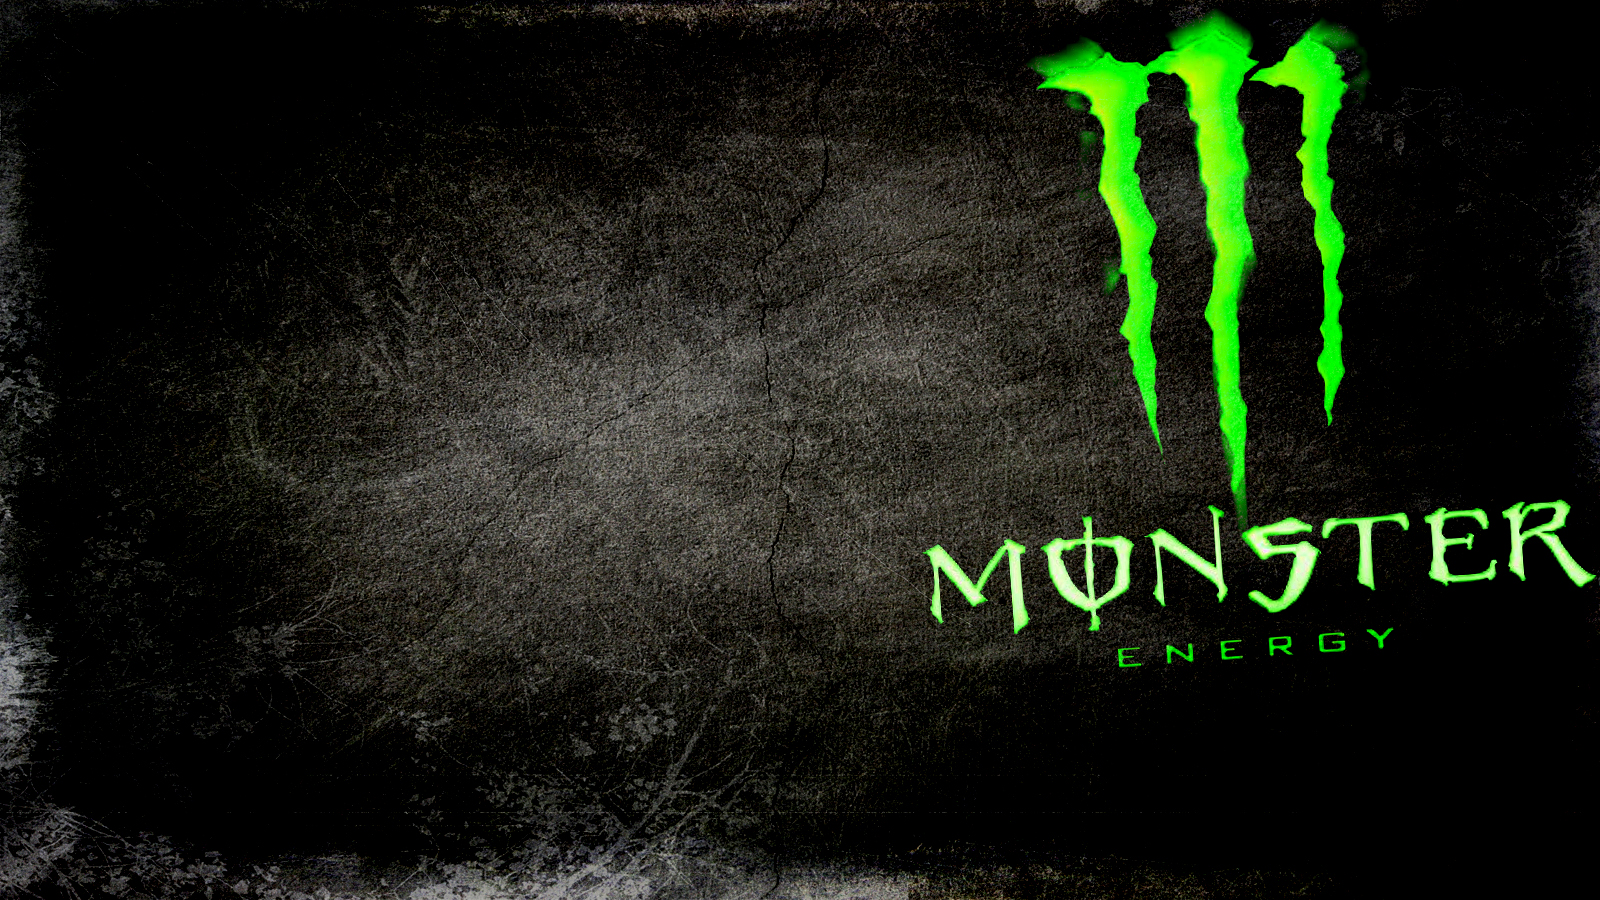 Free Download Monster Energy Wallpaper By Undeadjx 1600x900 For Your Desktop Mobile Tablet Explore 77 Wallpaper Monster Energy Monster Energy Backgrounds Monster Energy Background Monster Energy Wallpaper